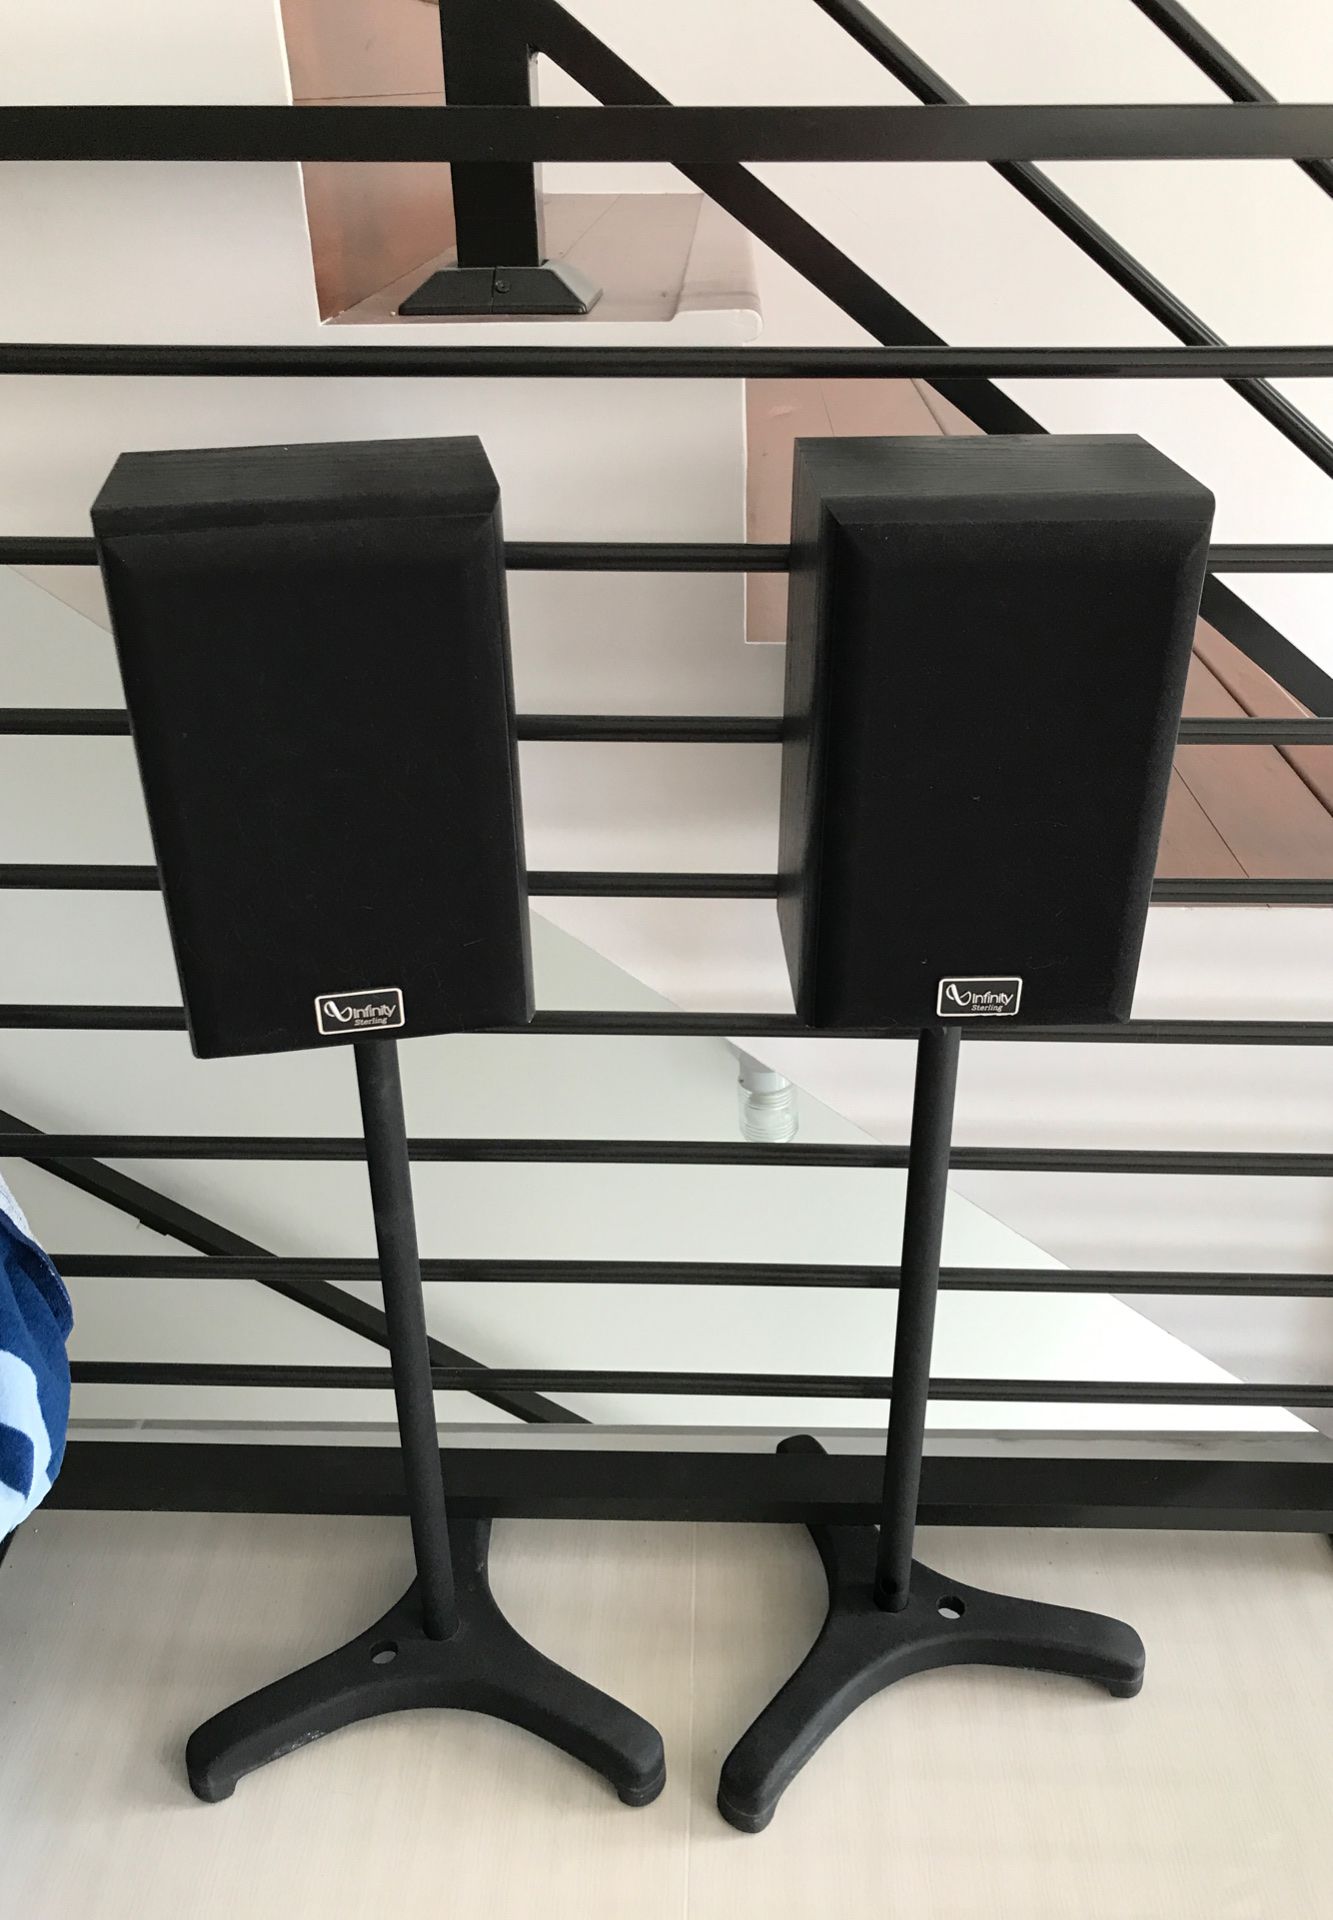 Infinity speakers and stands